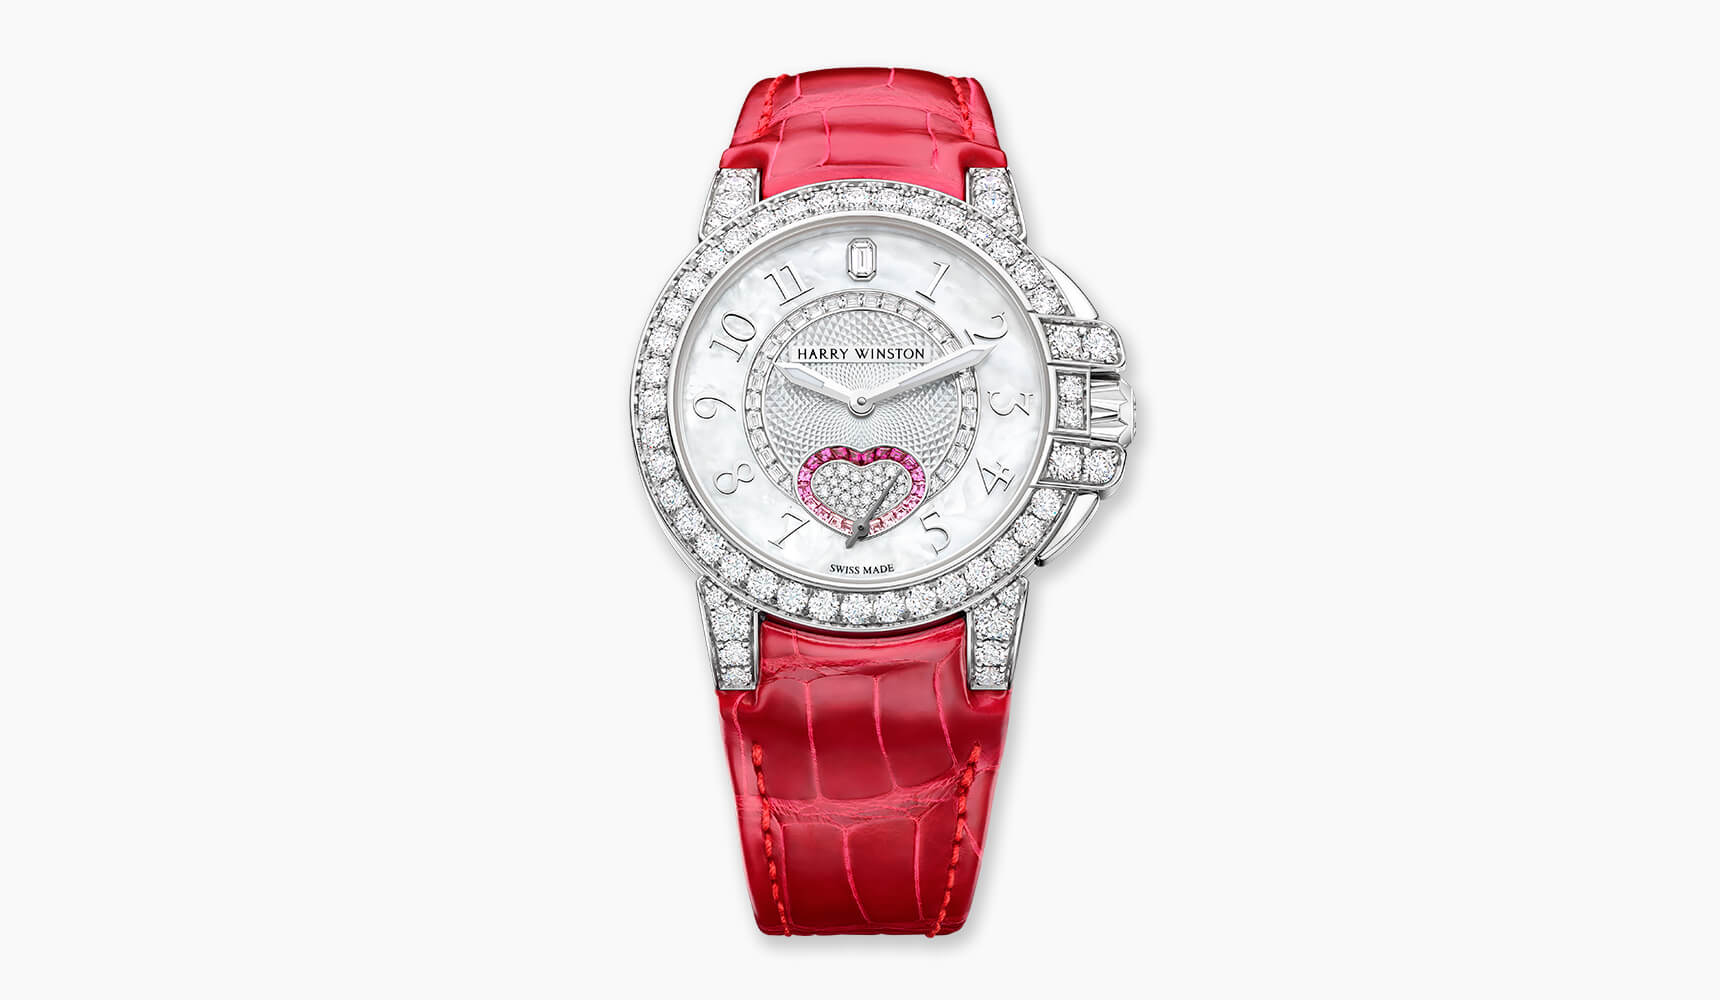 Harry Winston is proud to introduce a romantic Valentine’s Day timepiece in its sporty Ocean Collection